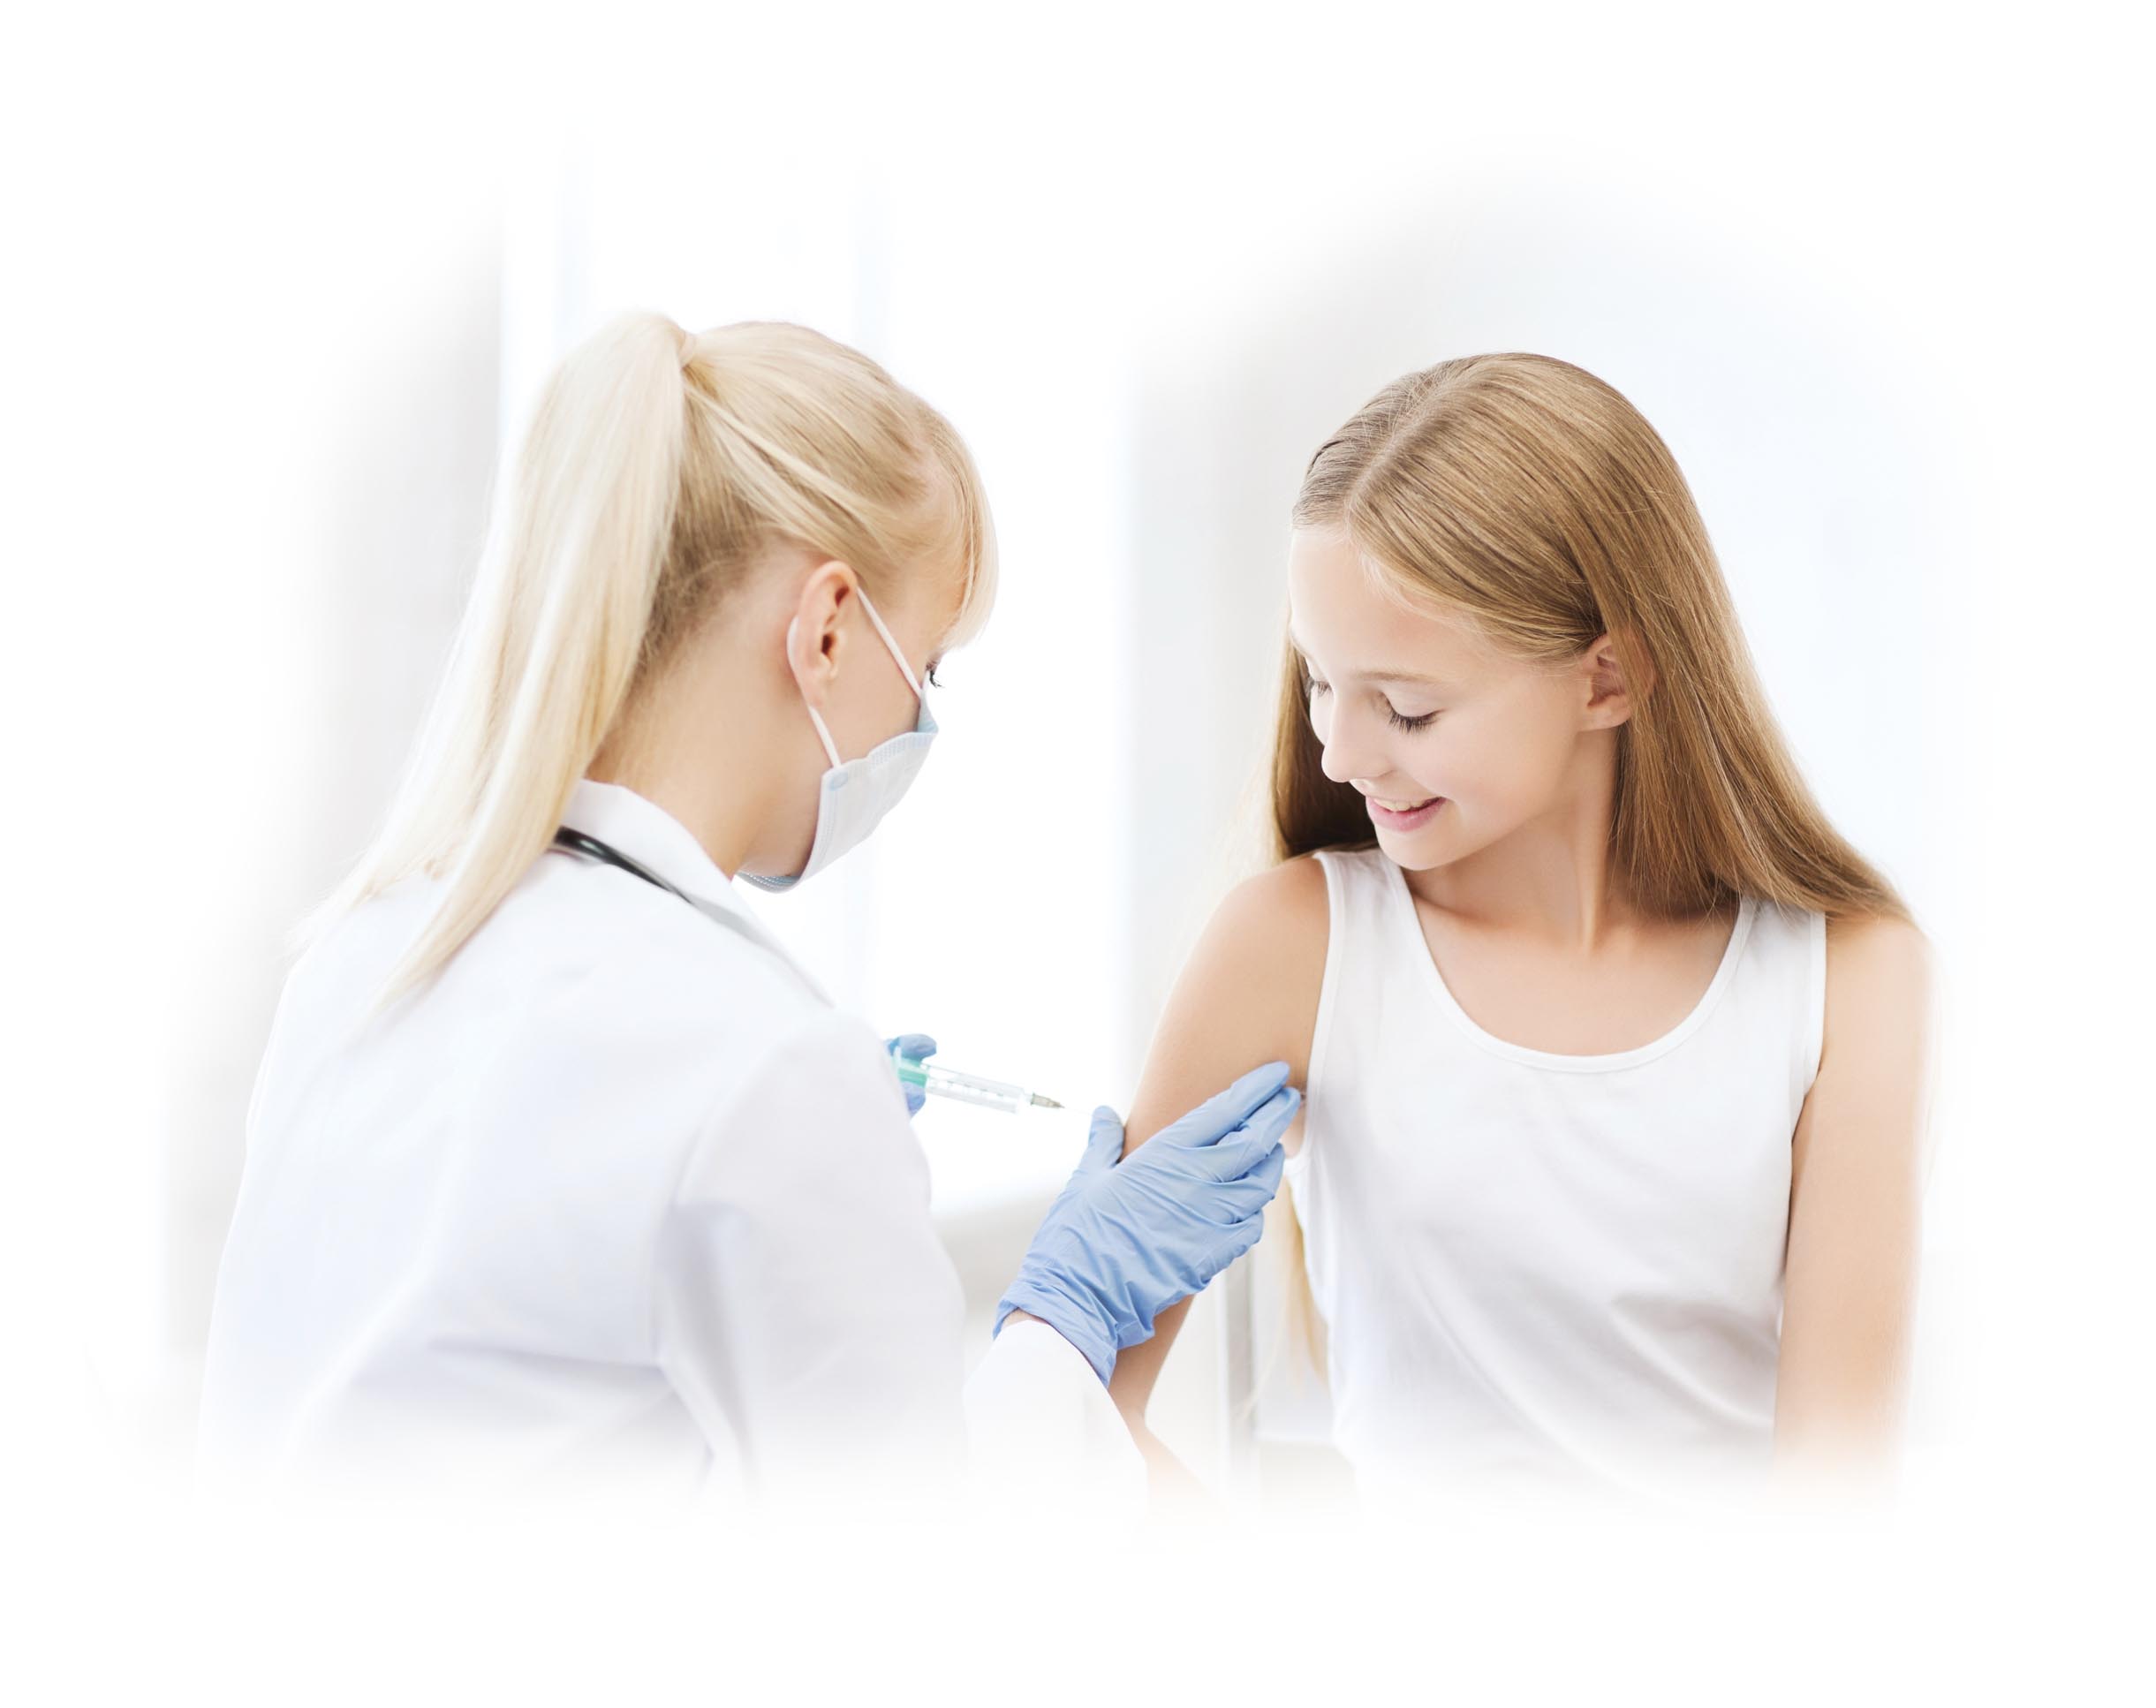 Medical staff giving a young girl a vaccination shot